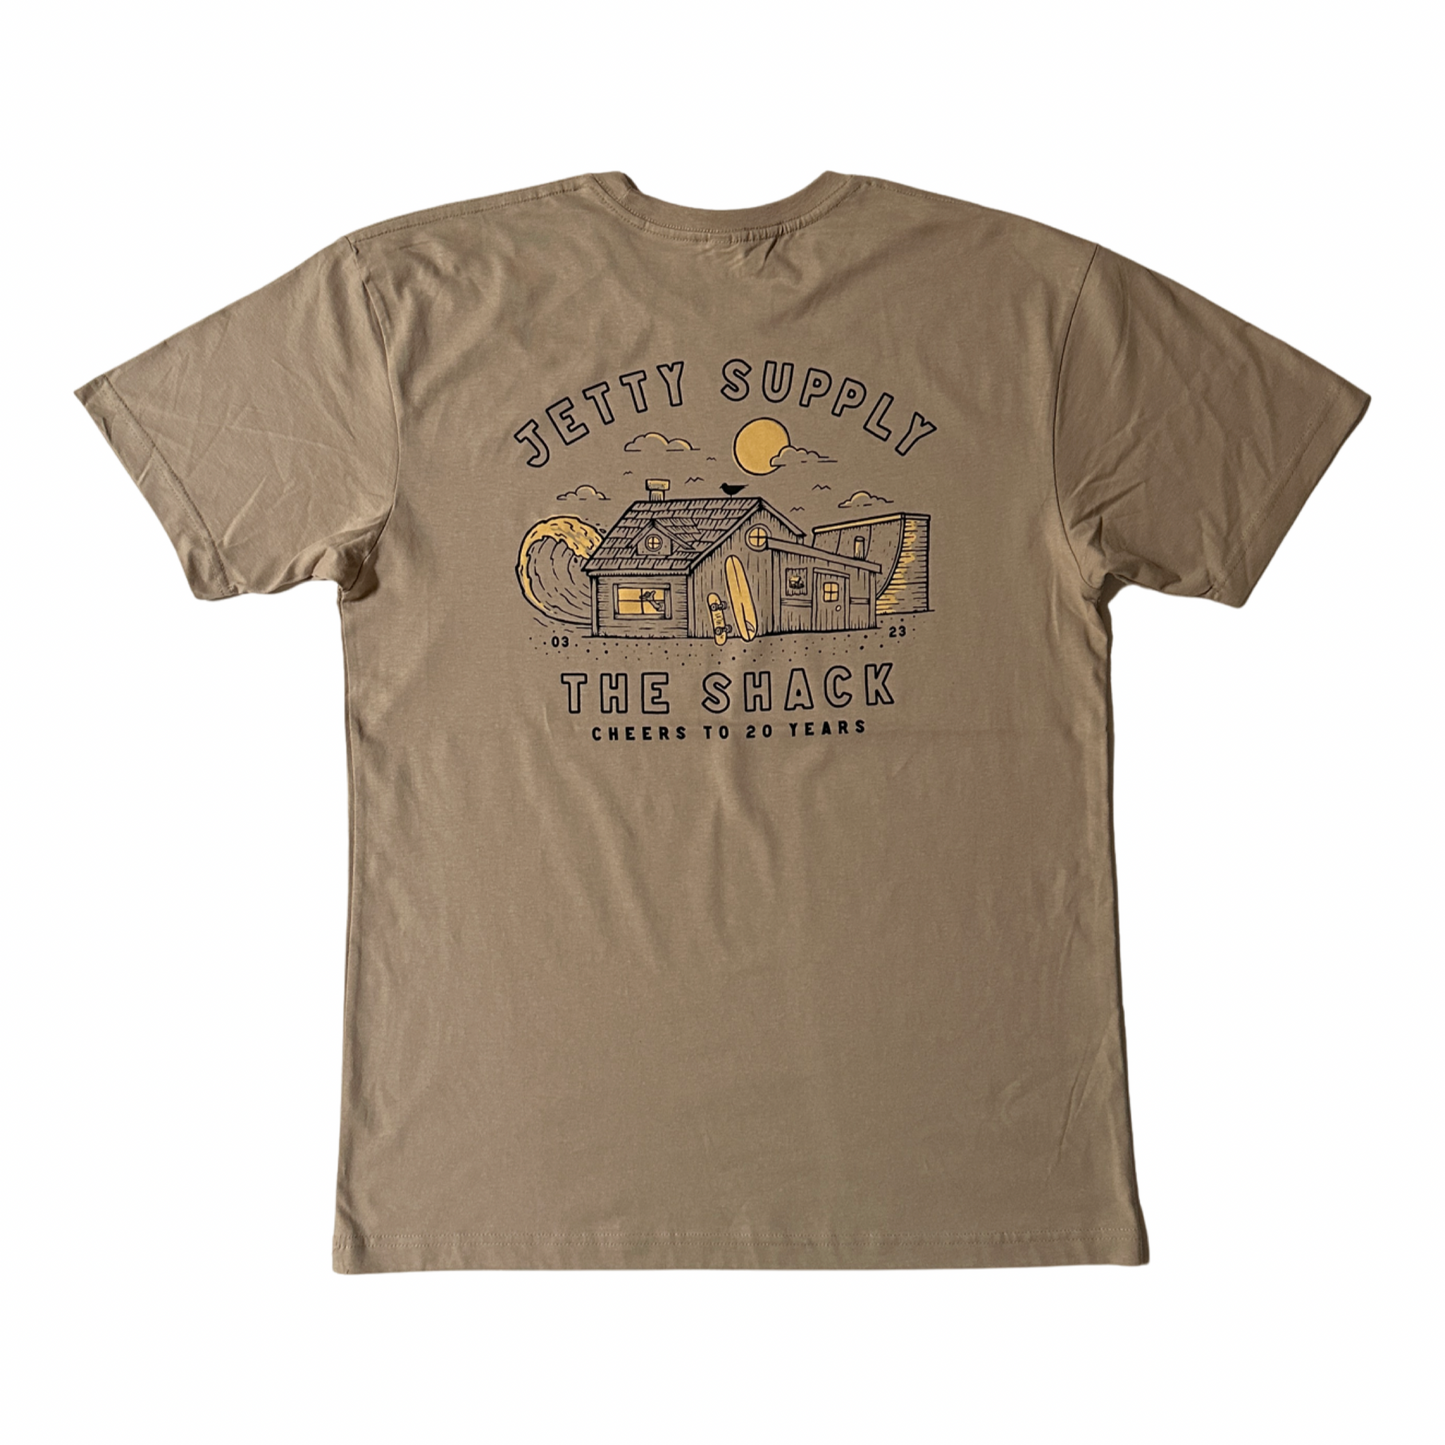 Surf Shack South x Jetty 20 Years Tee (New Color)